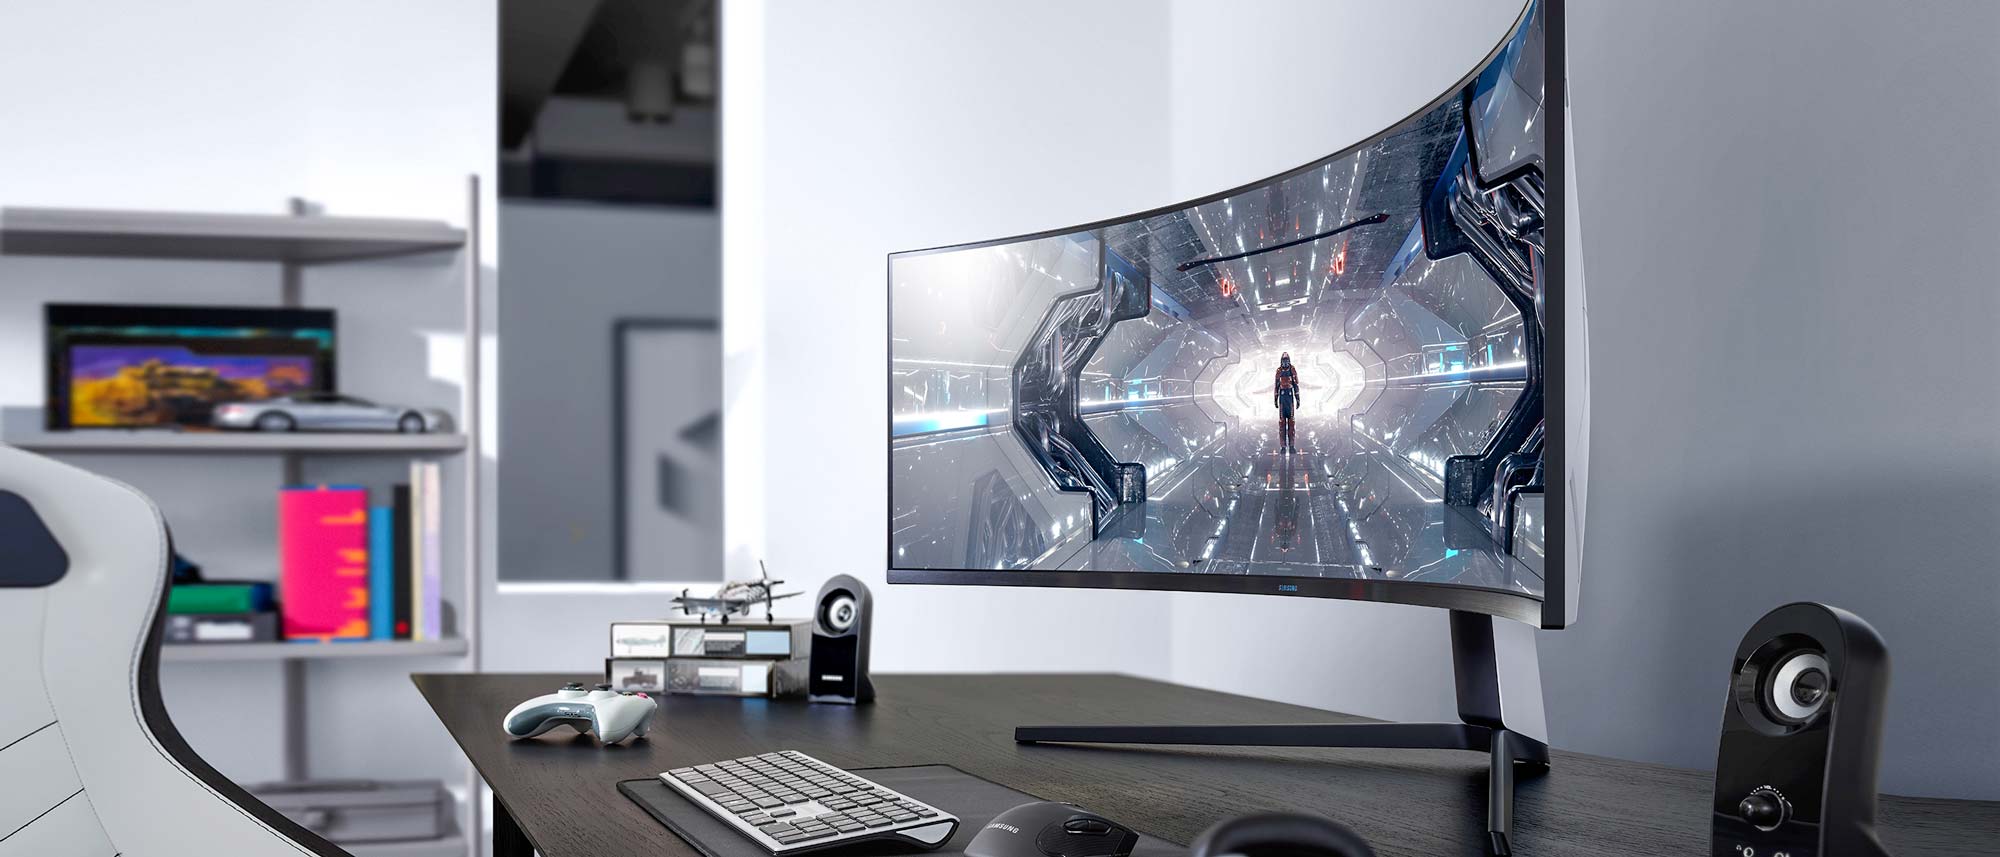 Samsung Odyssey G9 monitor review: Ridiculous in the best possible way